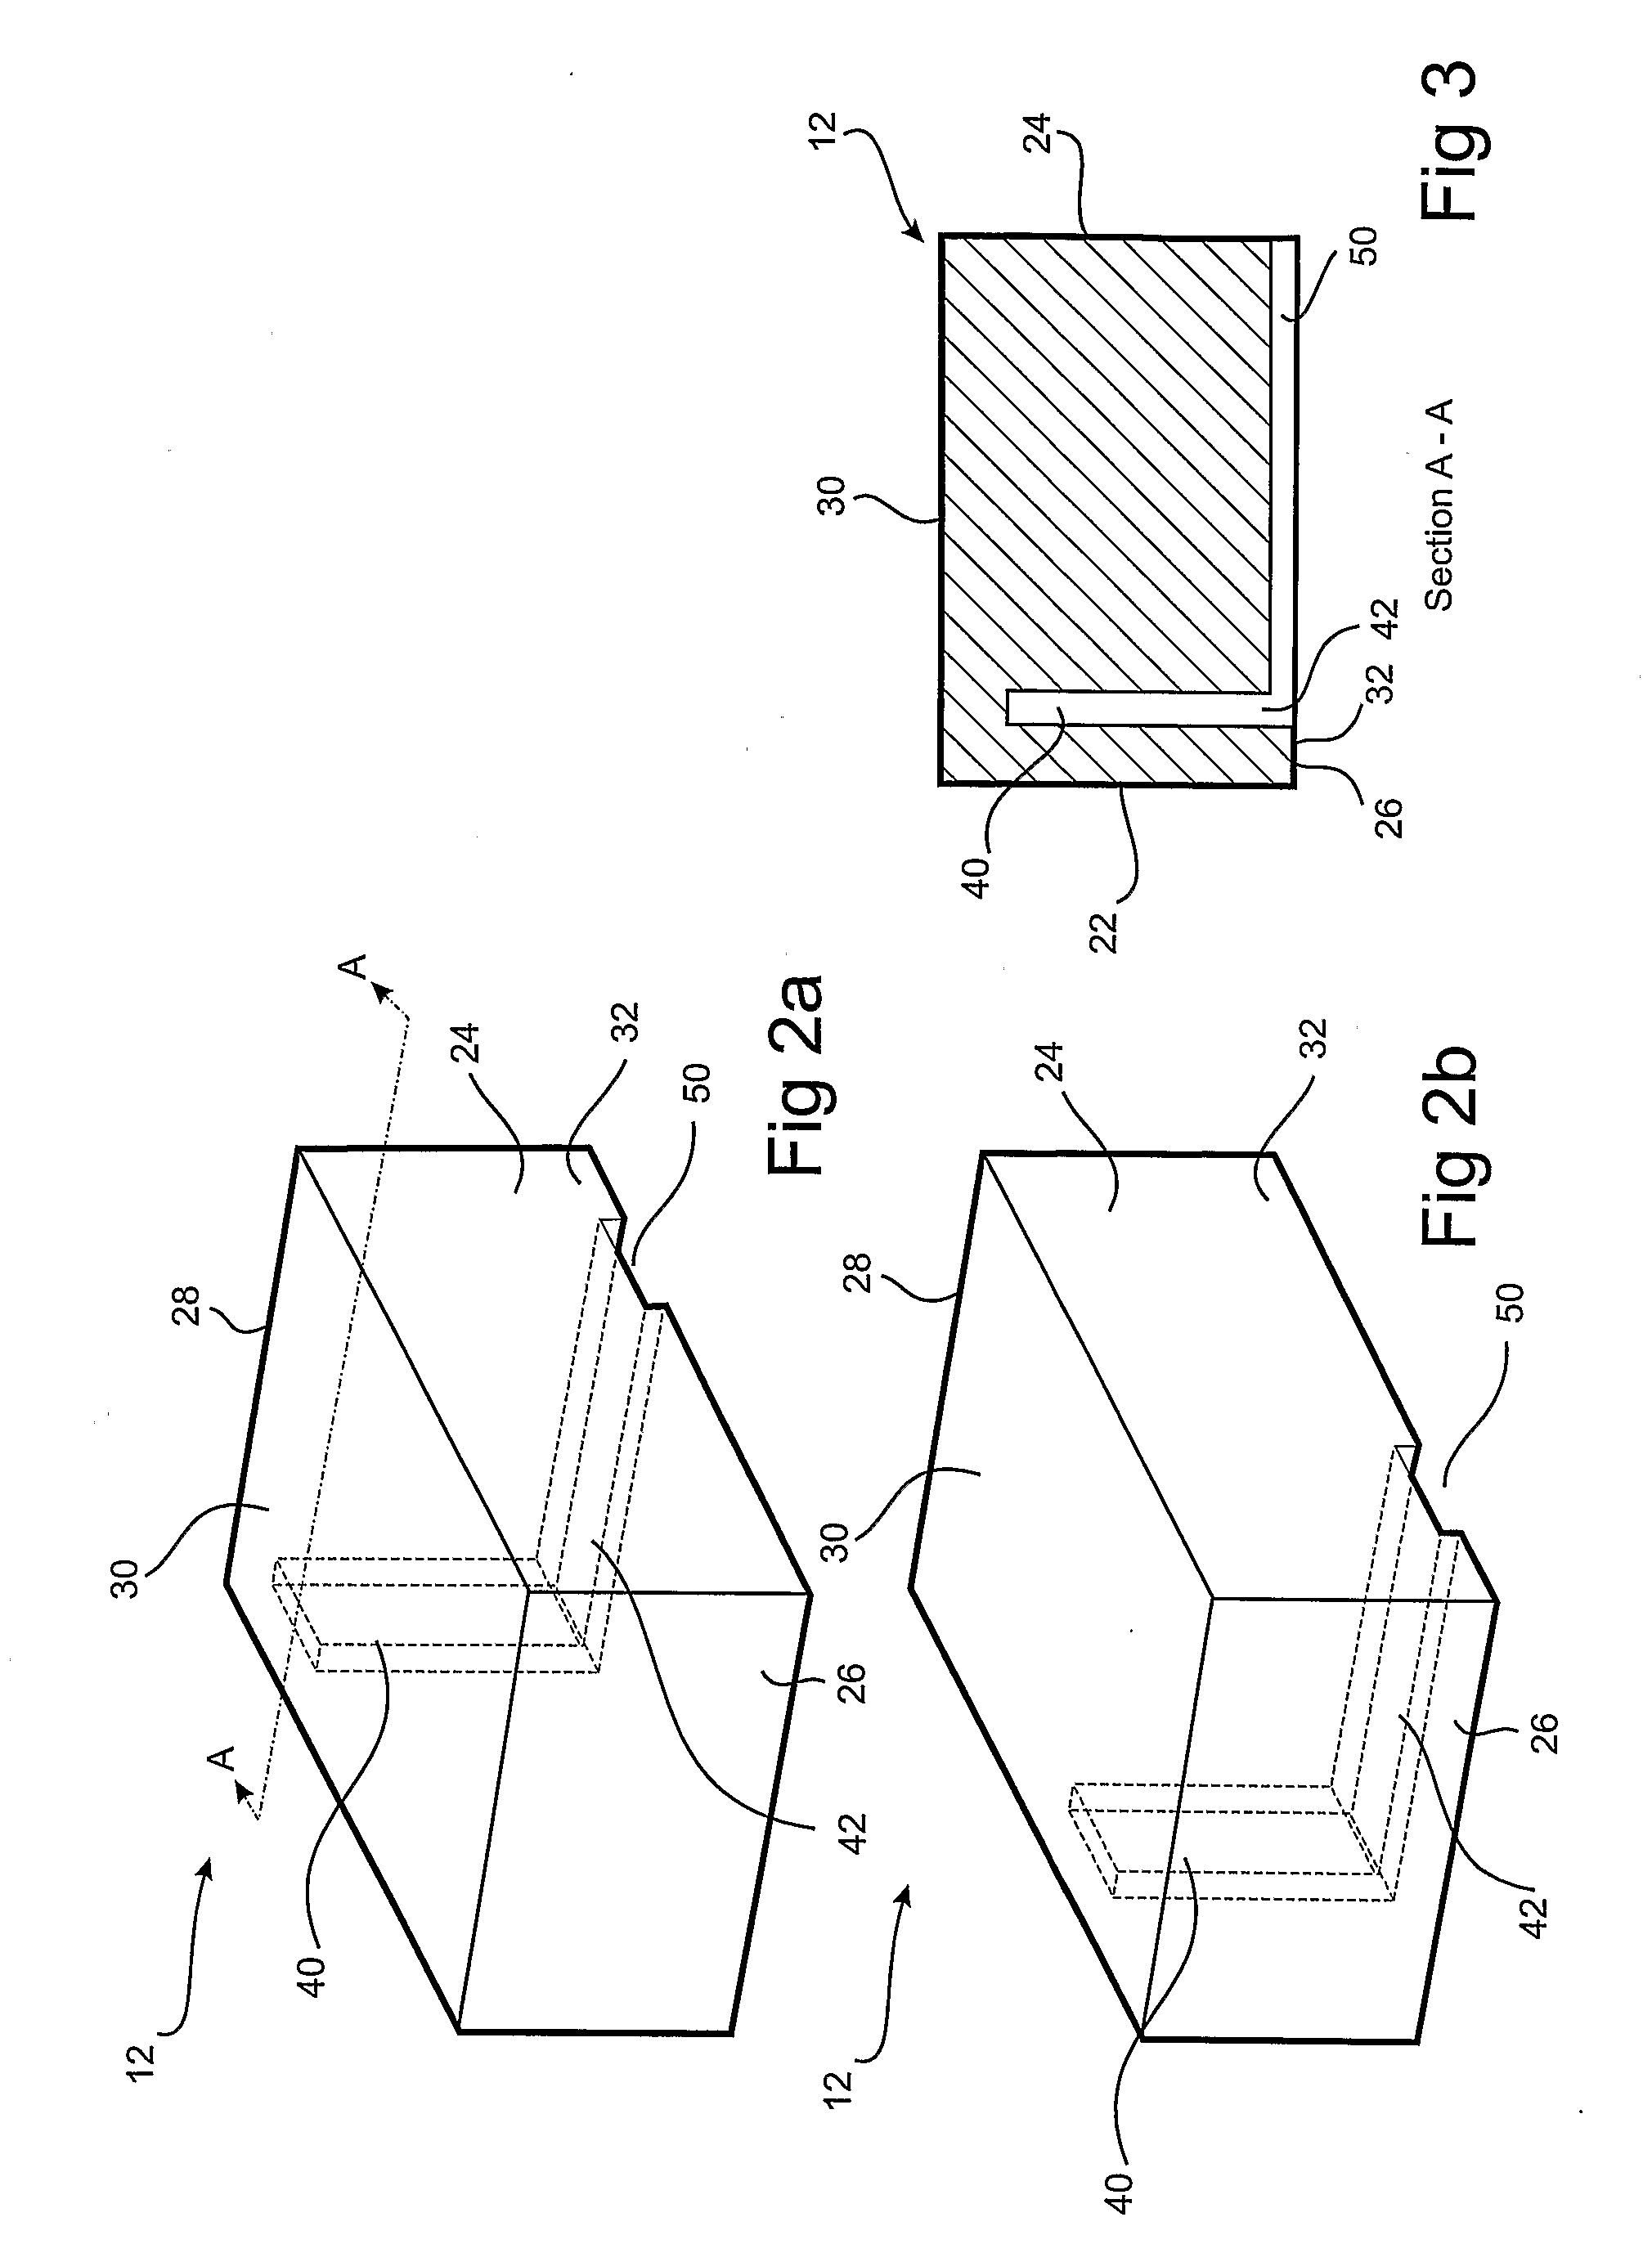 Reinforced Soil Retaining Wall System and Method of Construction